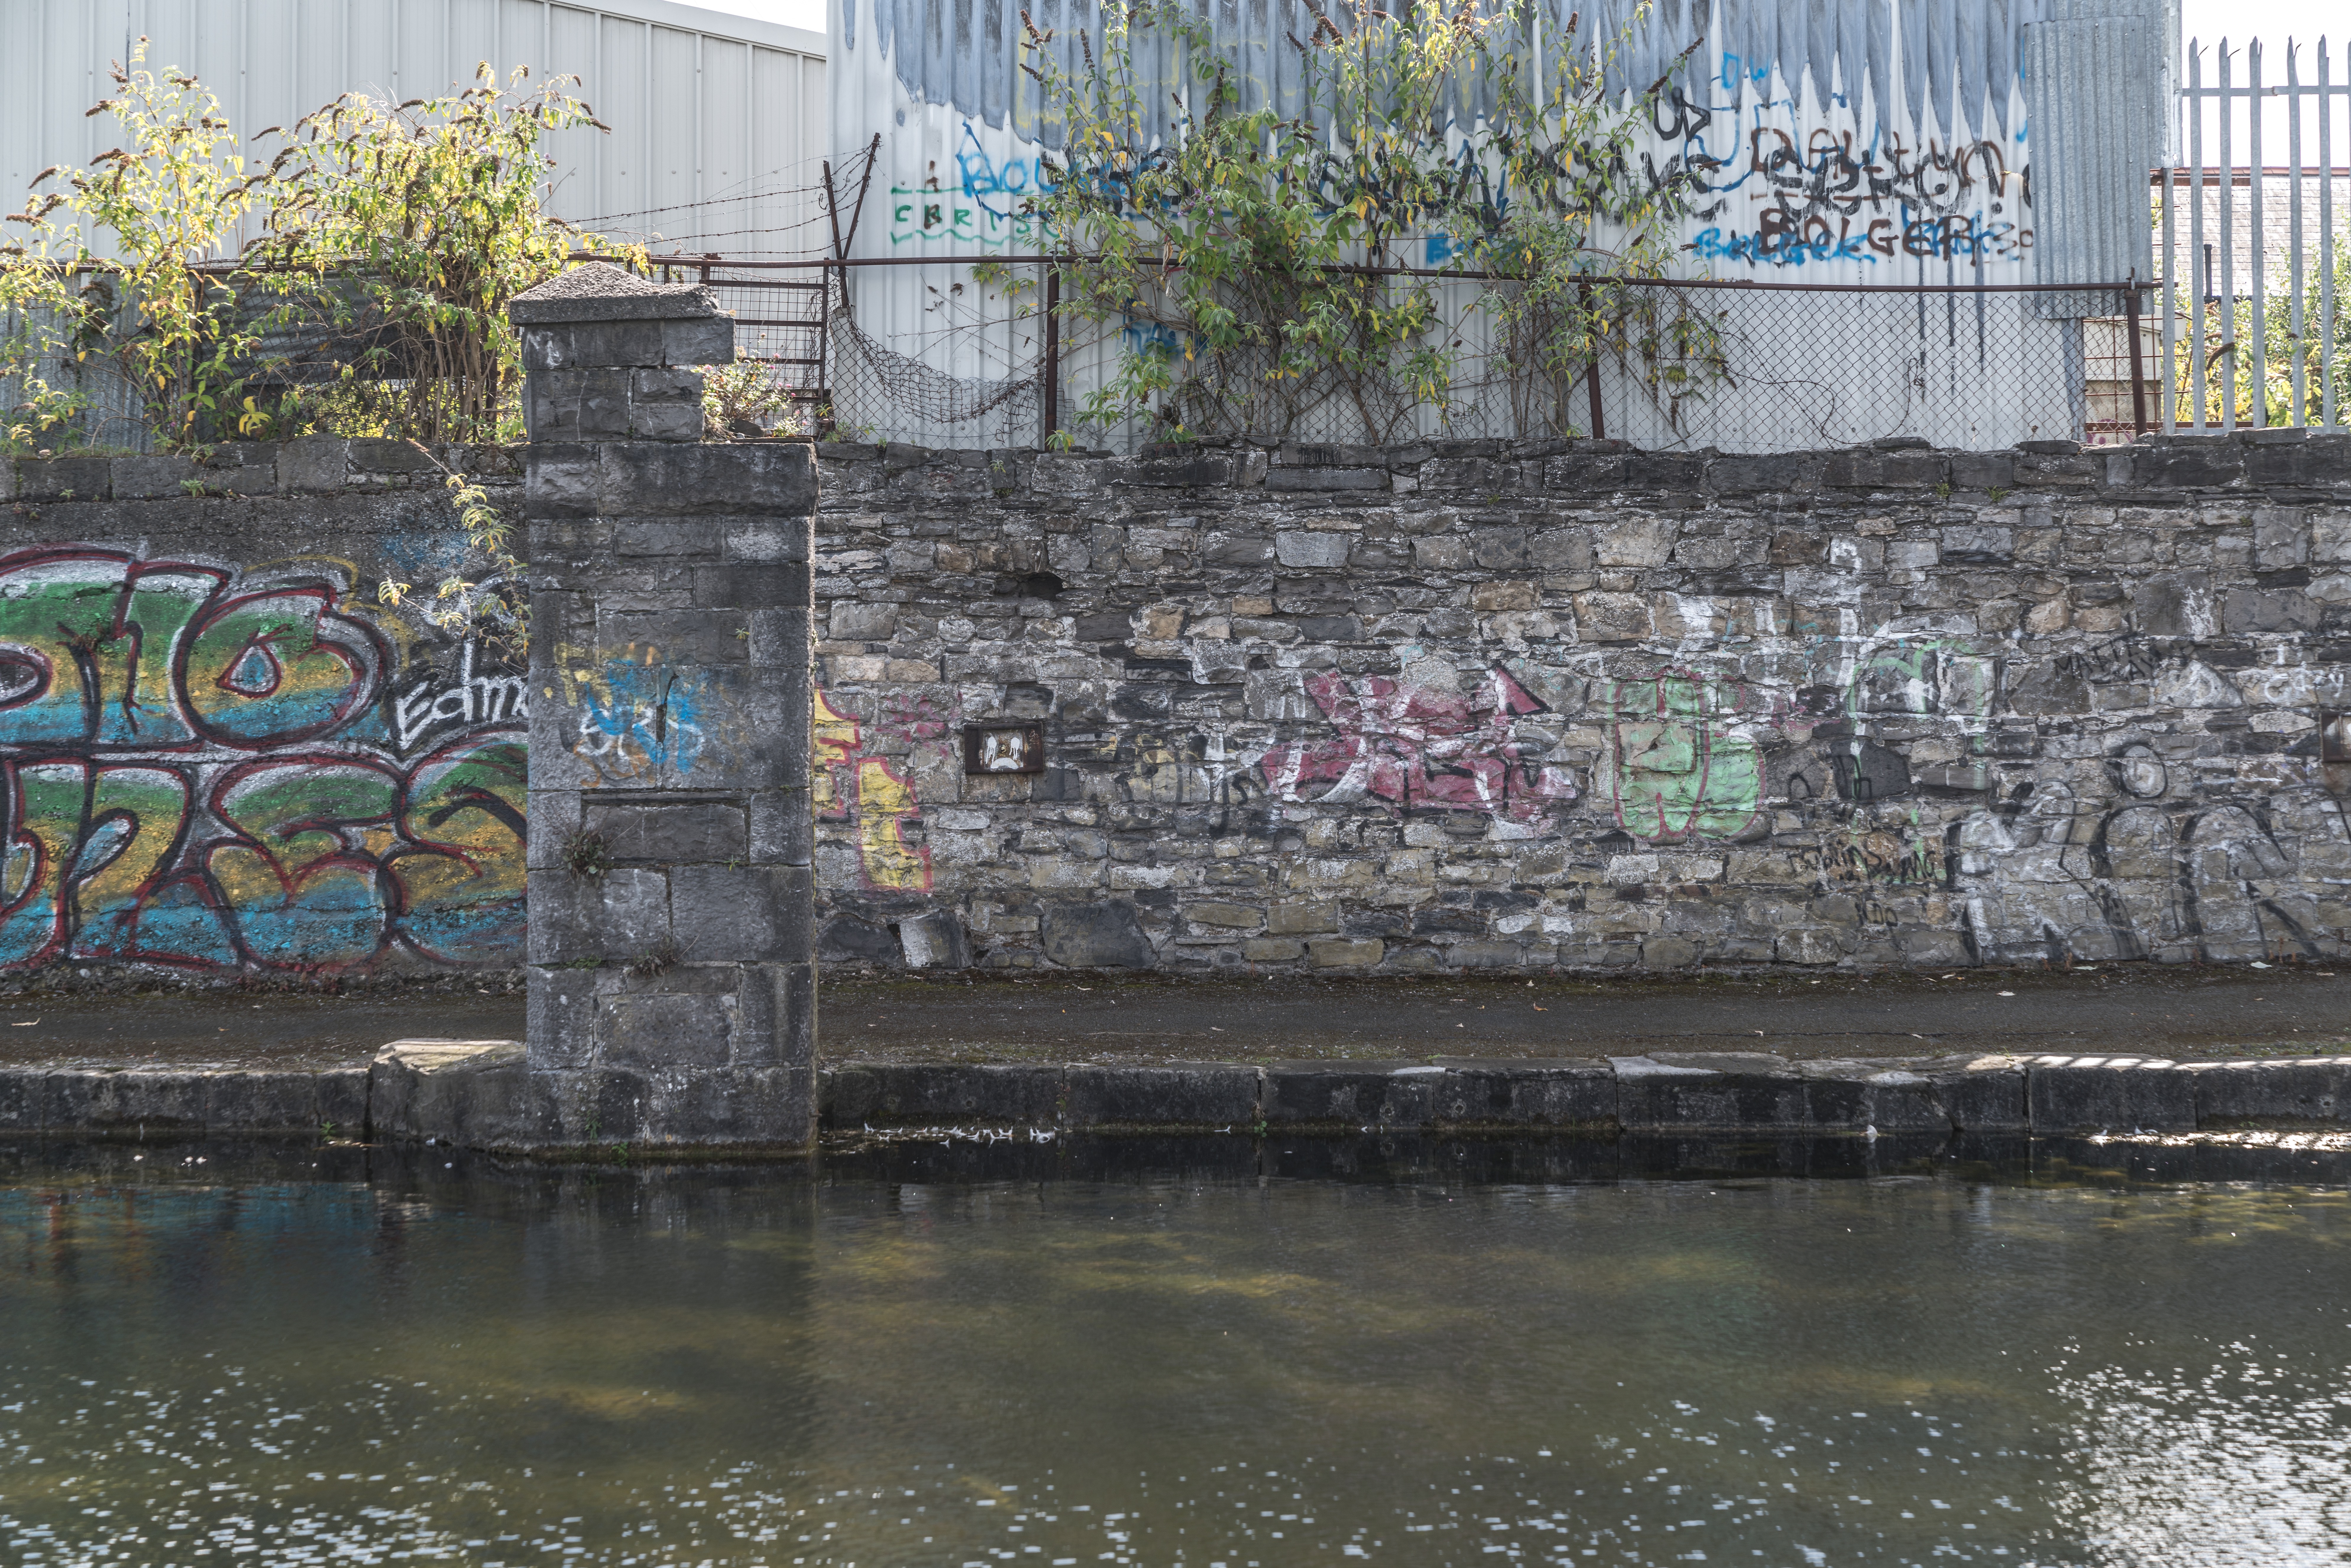  ROYAL CANAL - CABRA AREA 010 